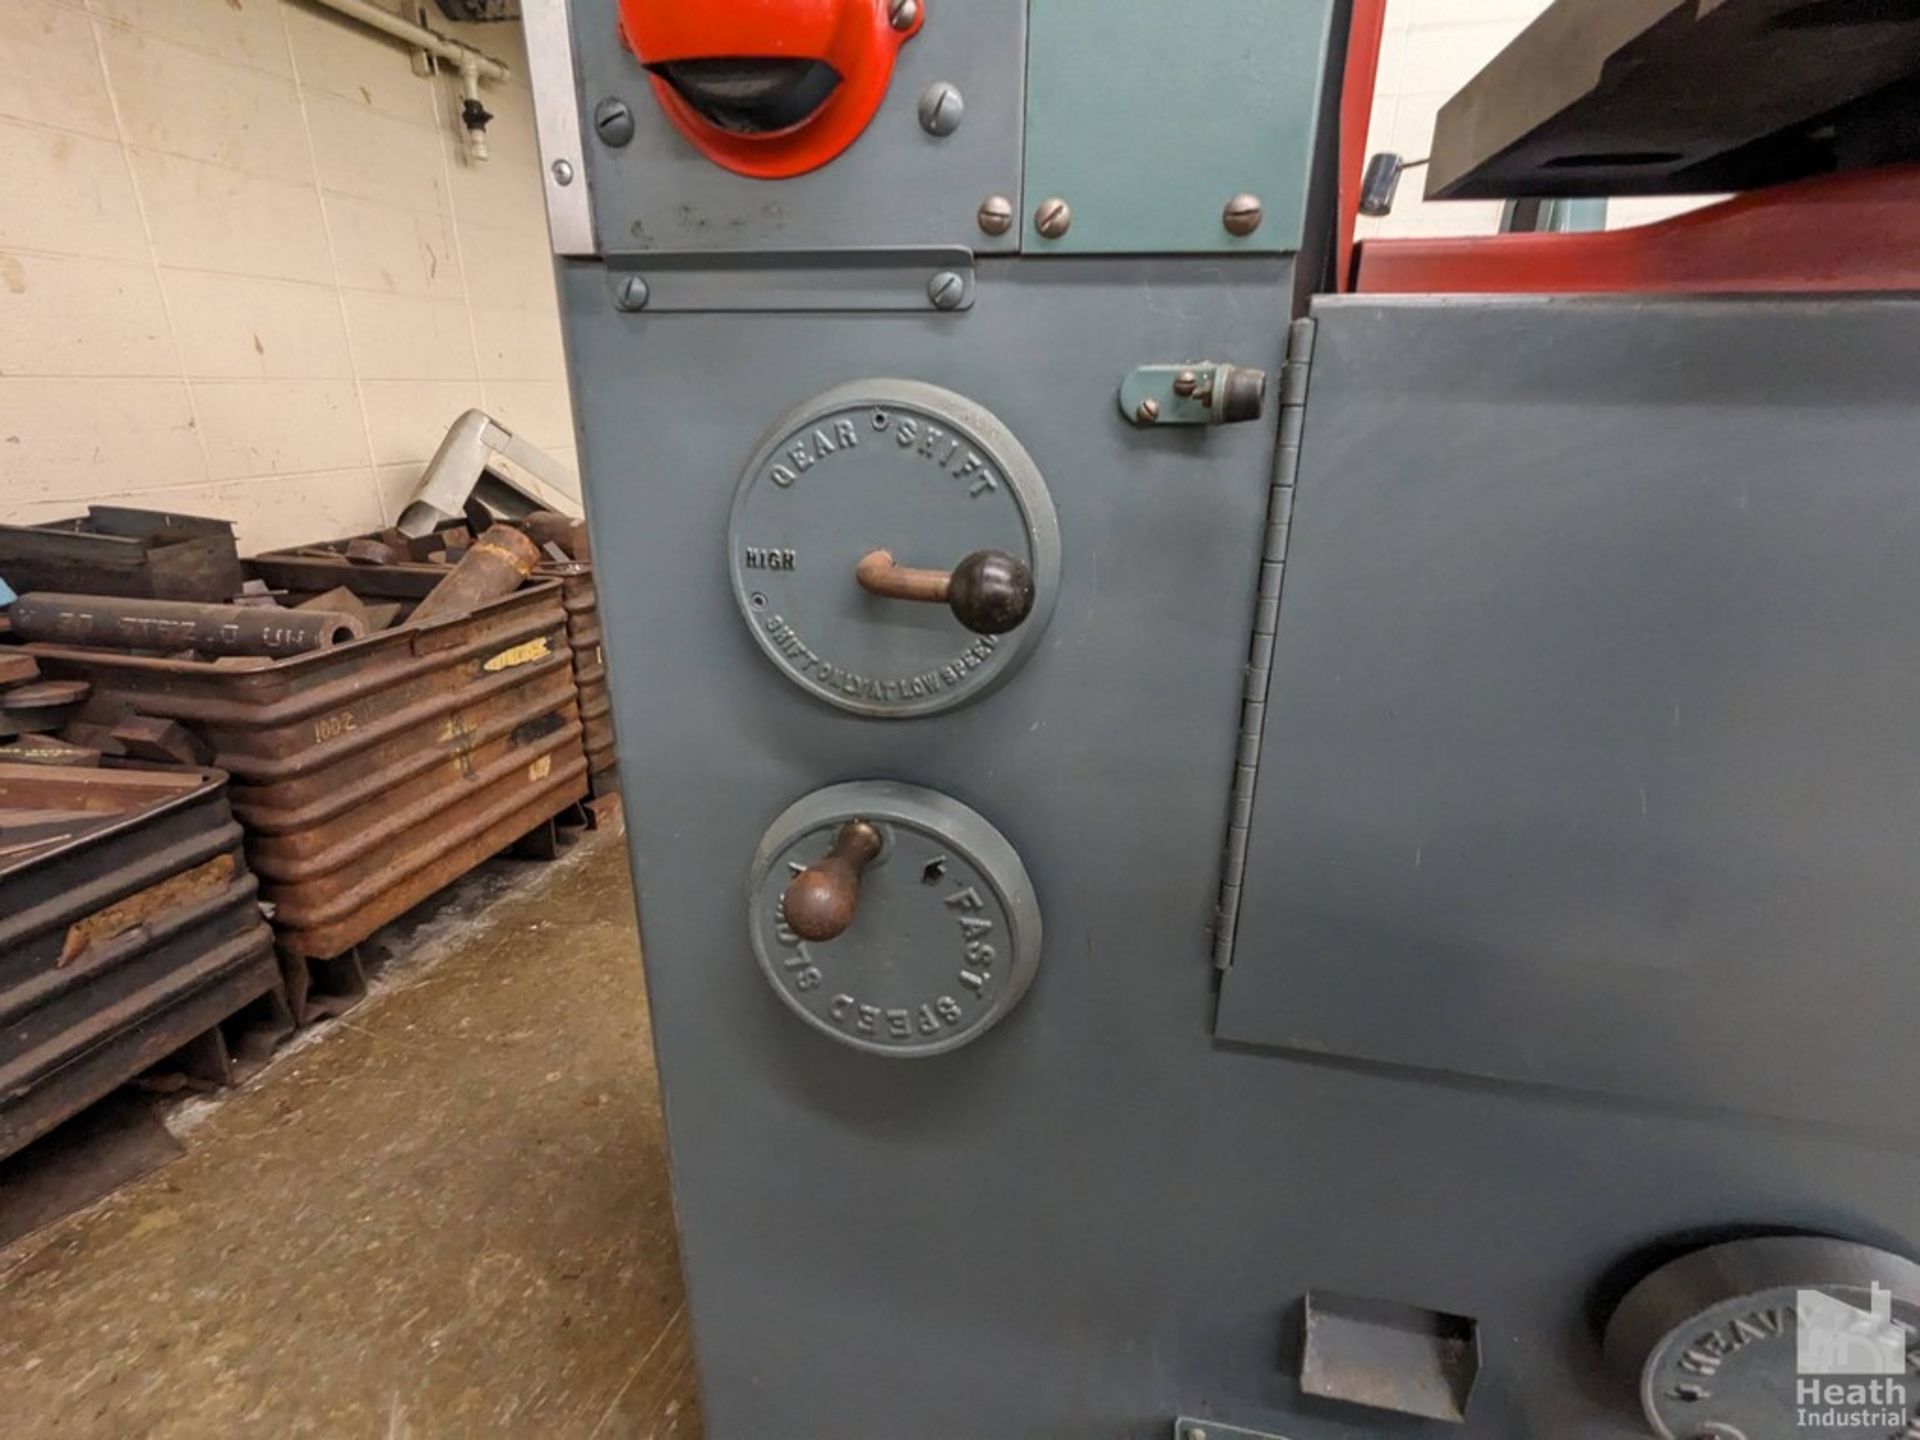 DOALL 16" MODEL 16-2 VERTICAL BAND SAW, S/N 45-55633 WITH BLADE WELDER Loading Fee :$150 - Image 5 of 8